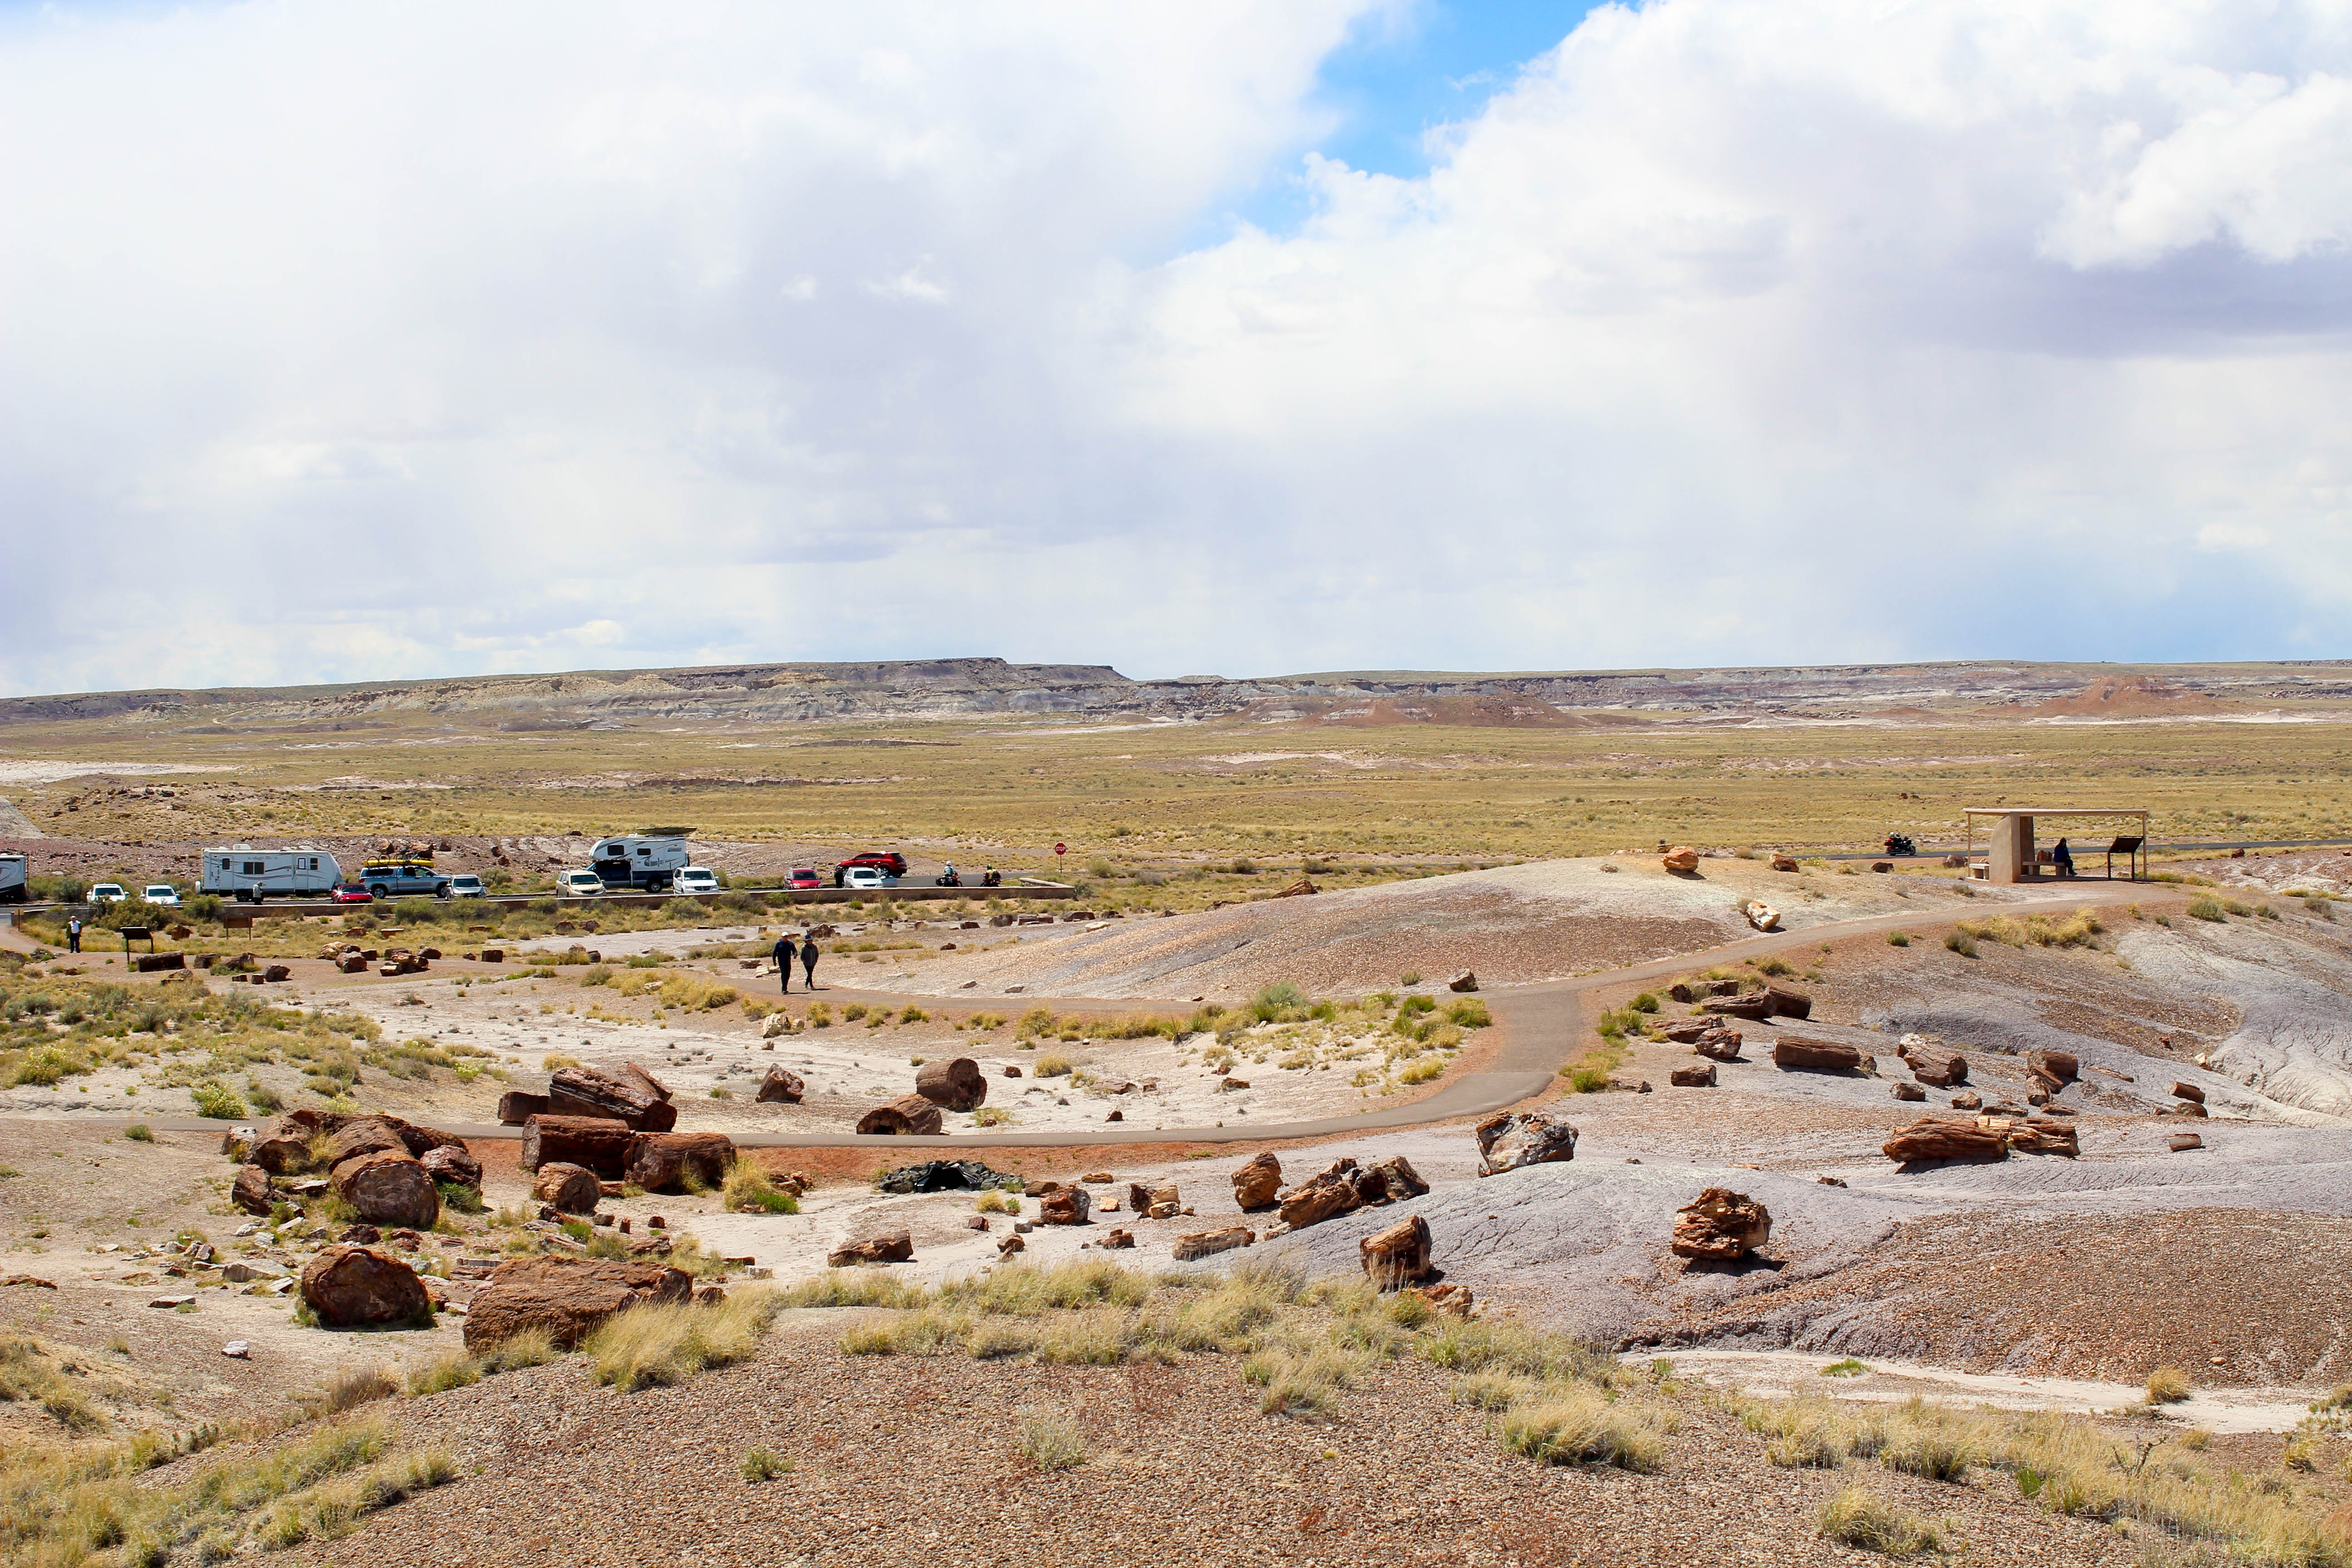 petrified tree trunks strewing the land in petrified forest national park